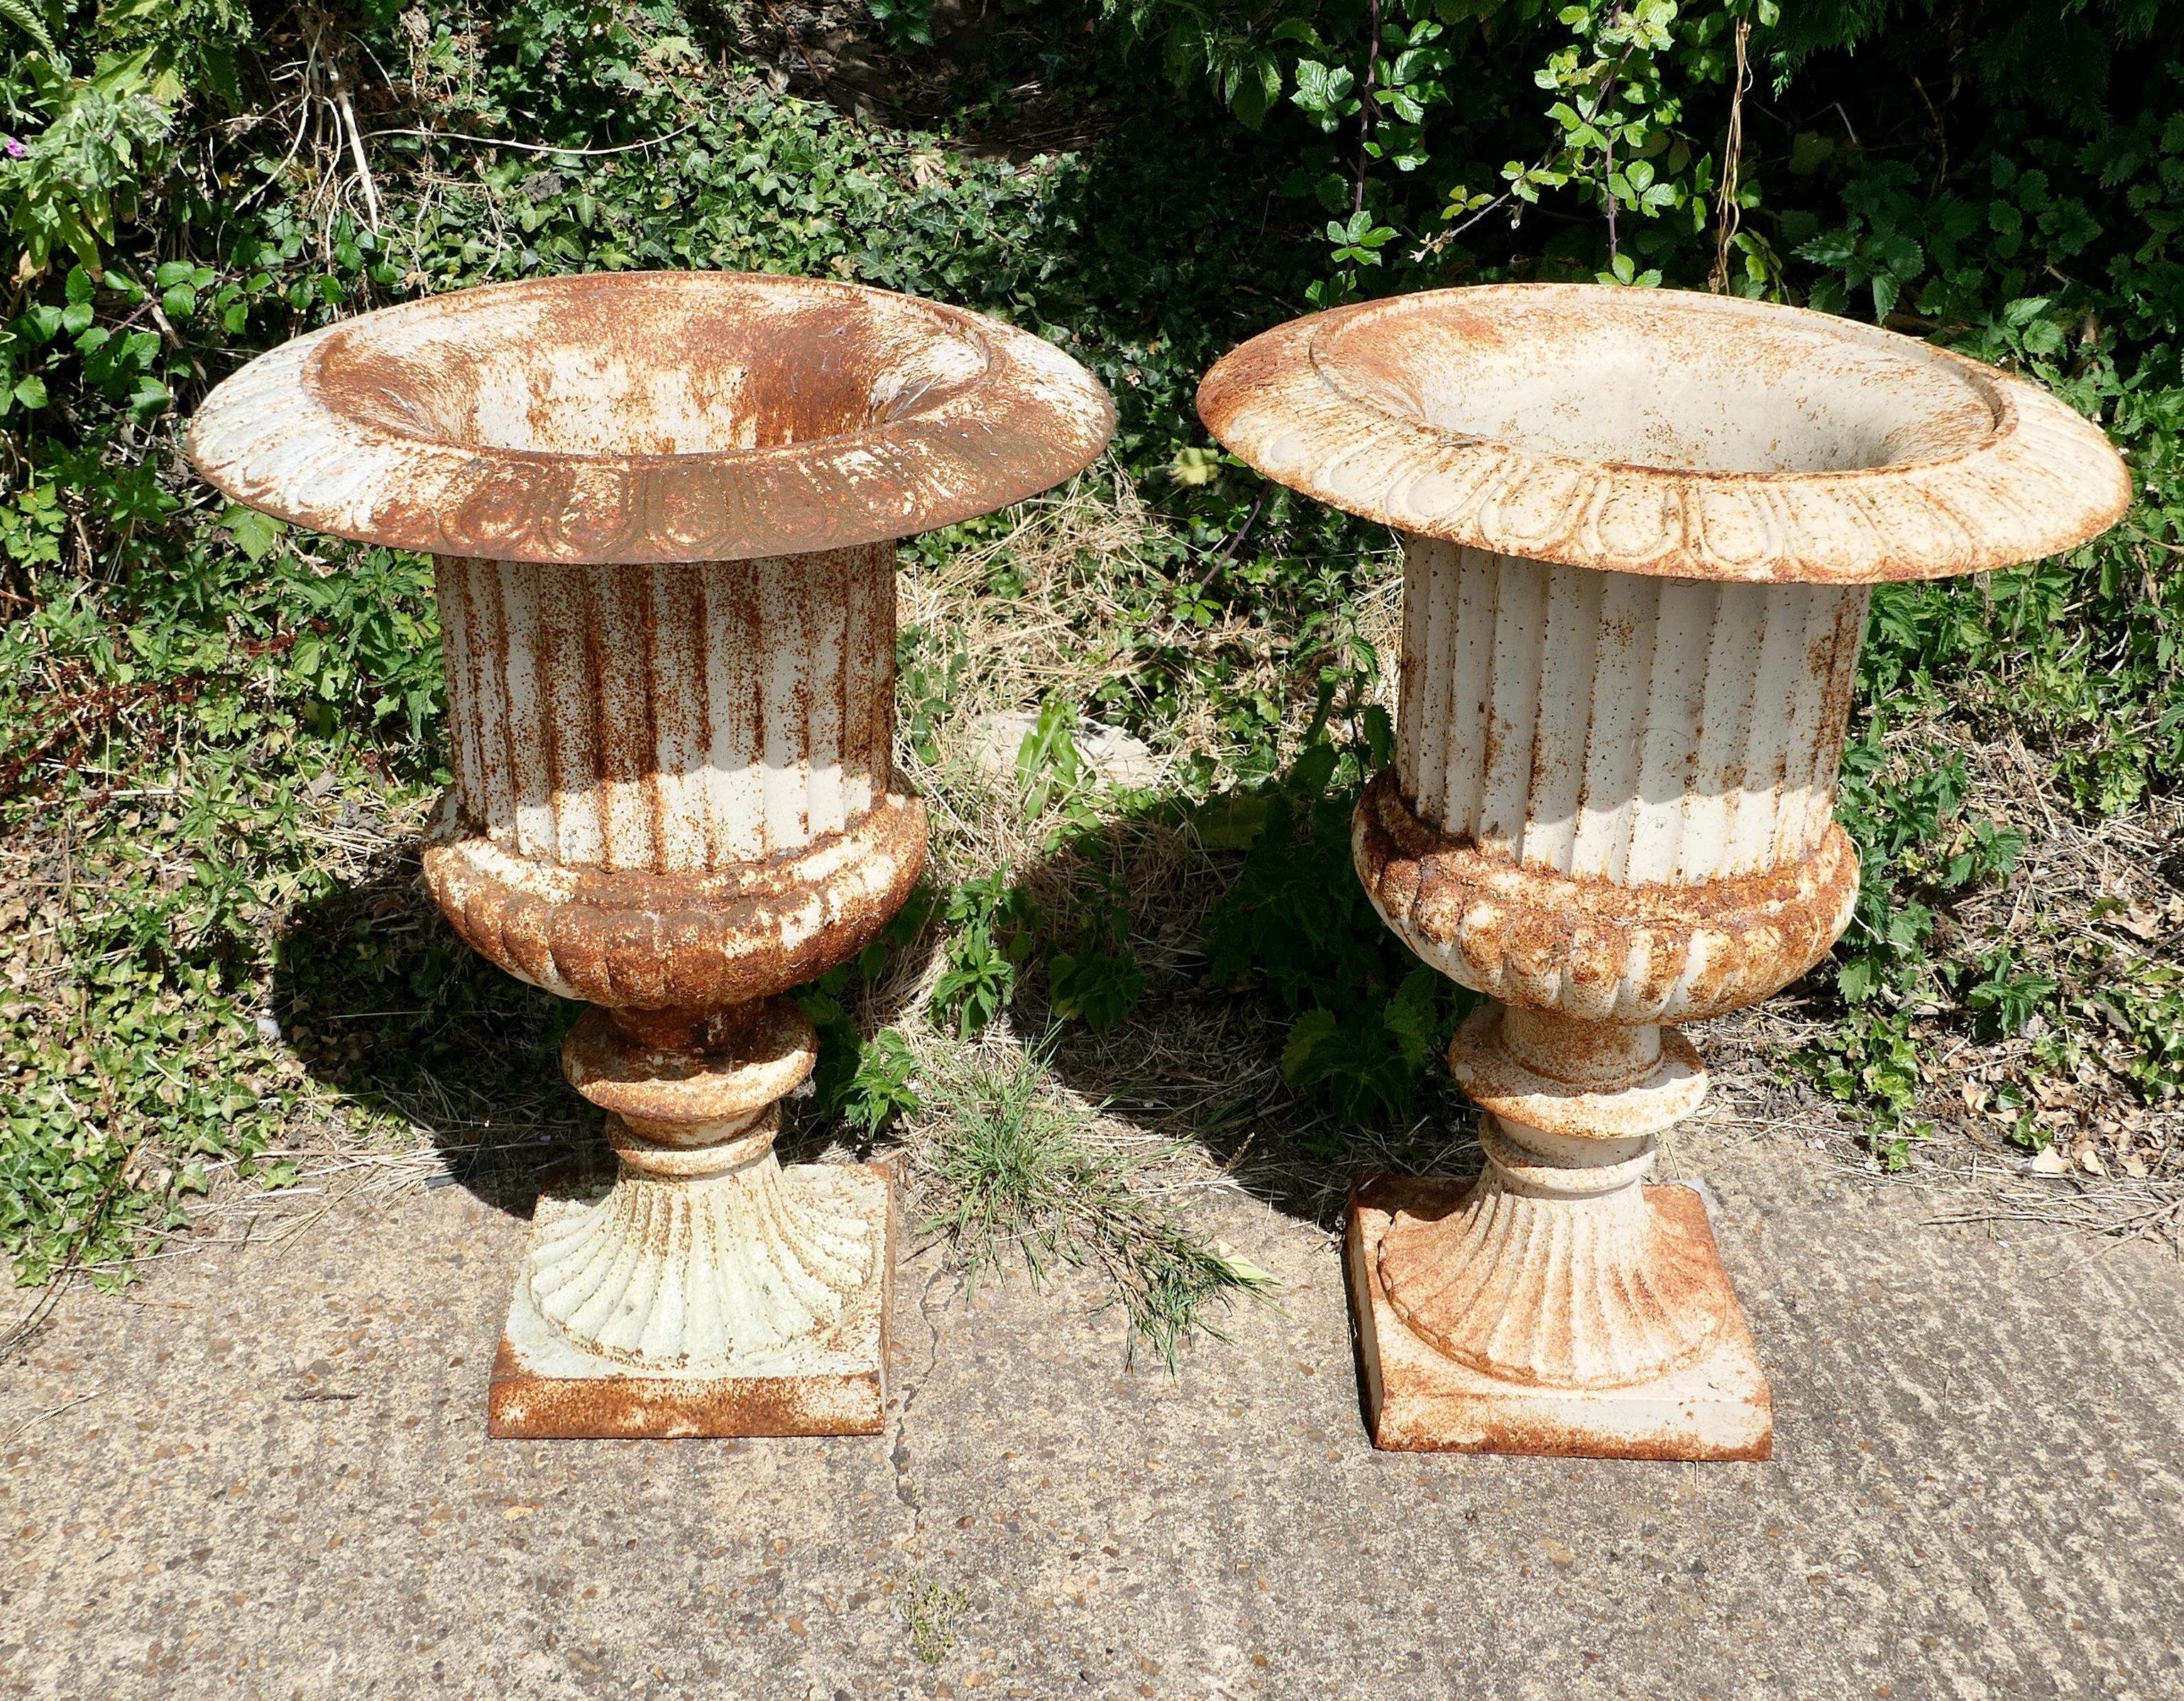 Pair of  Large Cast Iron Garden Urns, Garden Planters

This is a superb and unusually large pair of cast iron urns 
The urns are in good condition for their age, still very sound although they are weather worn and slightly rusty paint which after